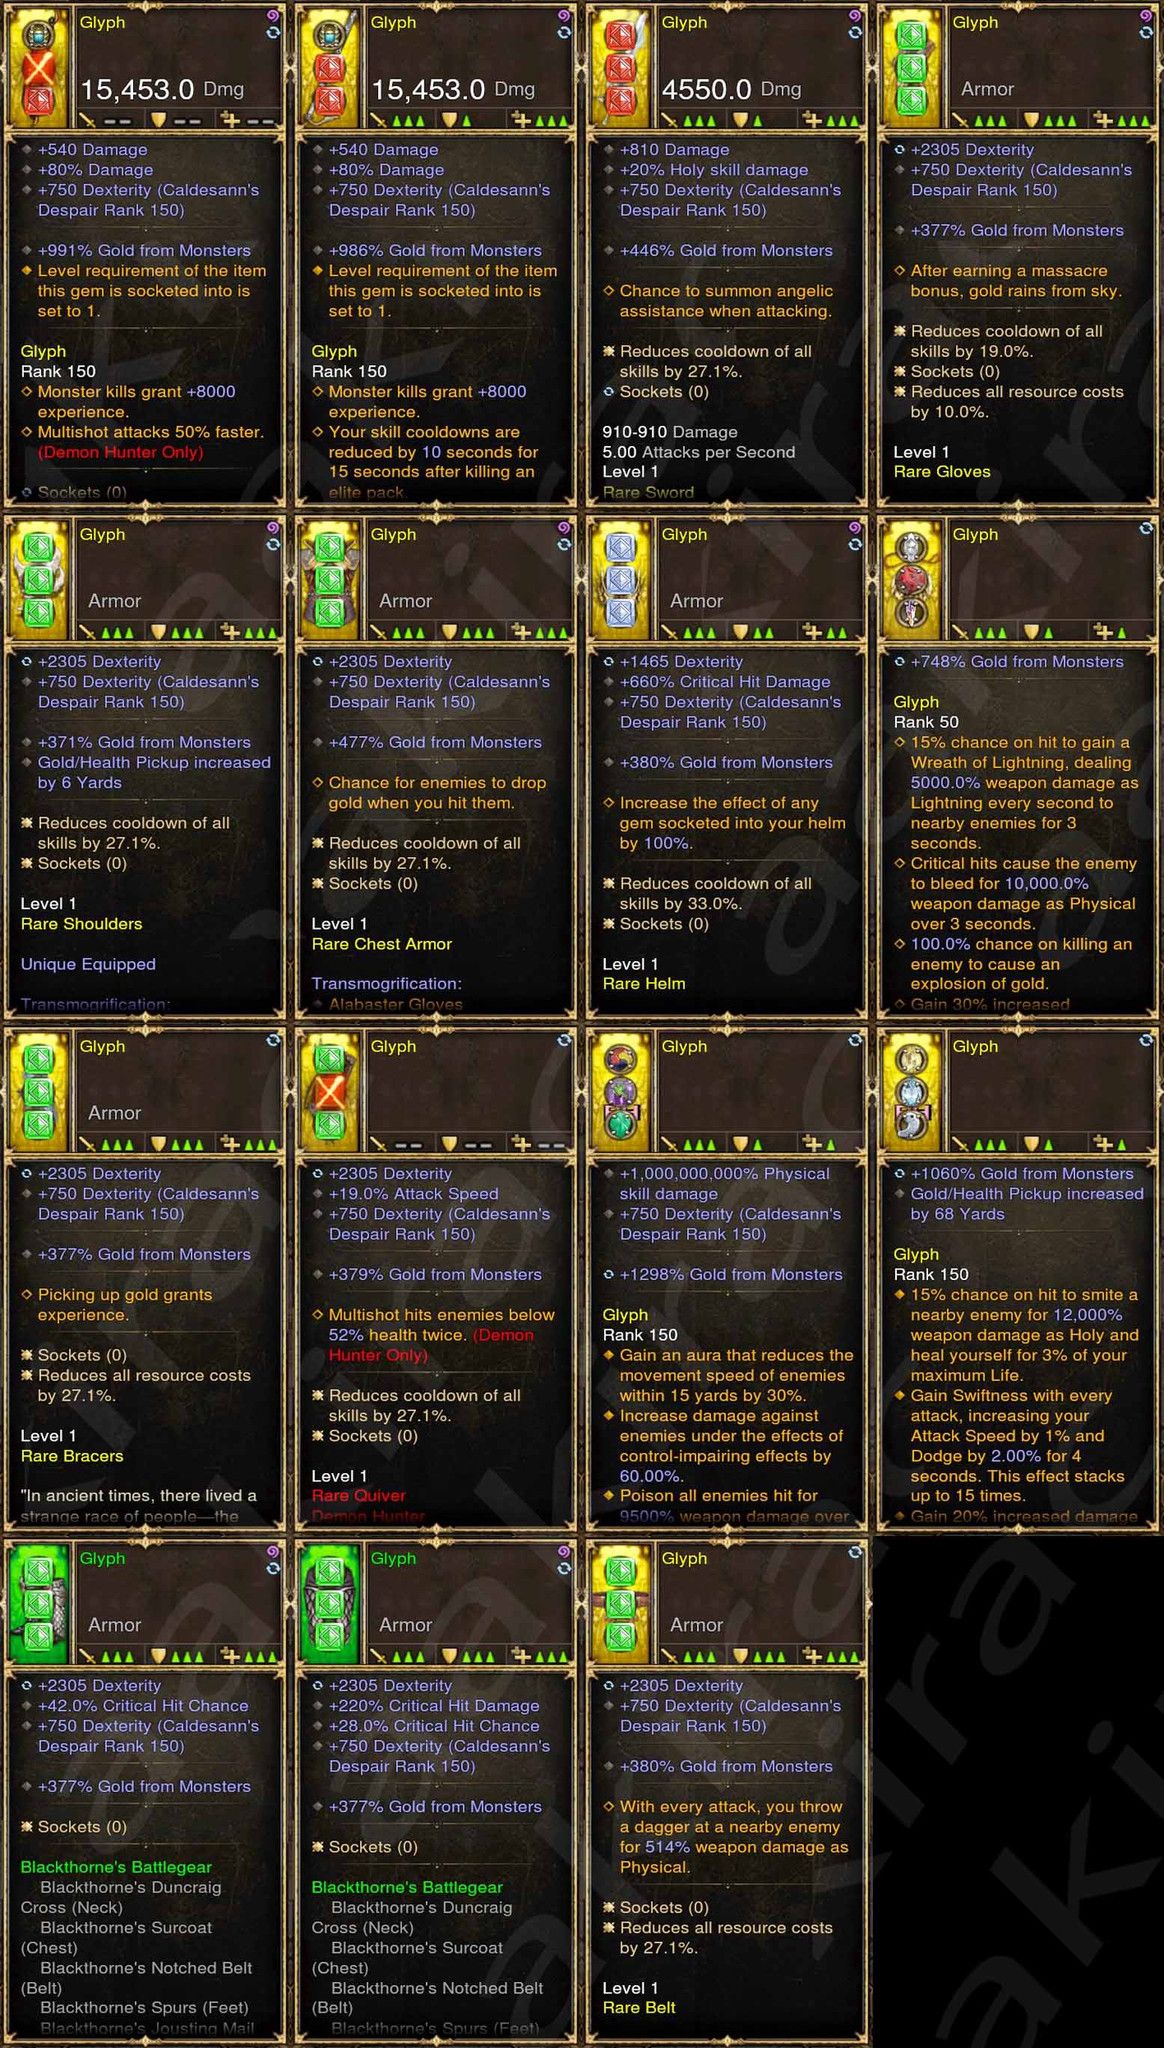 GOLD% / Pickup EXP v2 Leveling Set 1-70 Faster (UPDATED: STR, DEX, INT) Diablo 3 Mods ROS Seasonal and Non Seasonal Save Mod - Modded Items and Gear - Hacks - Cheats - Trainers for Playstation 4 - Playstation 5 - Nintendo Switch - Xbox One